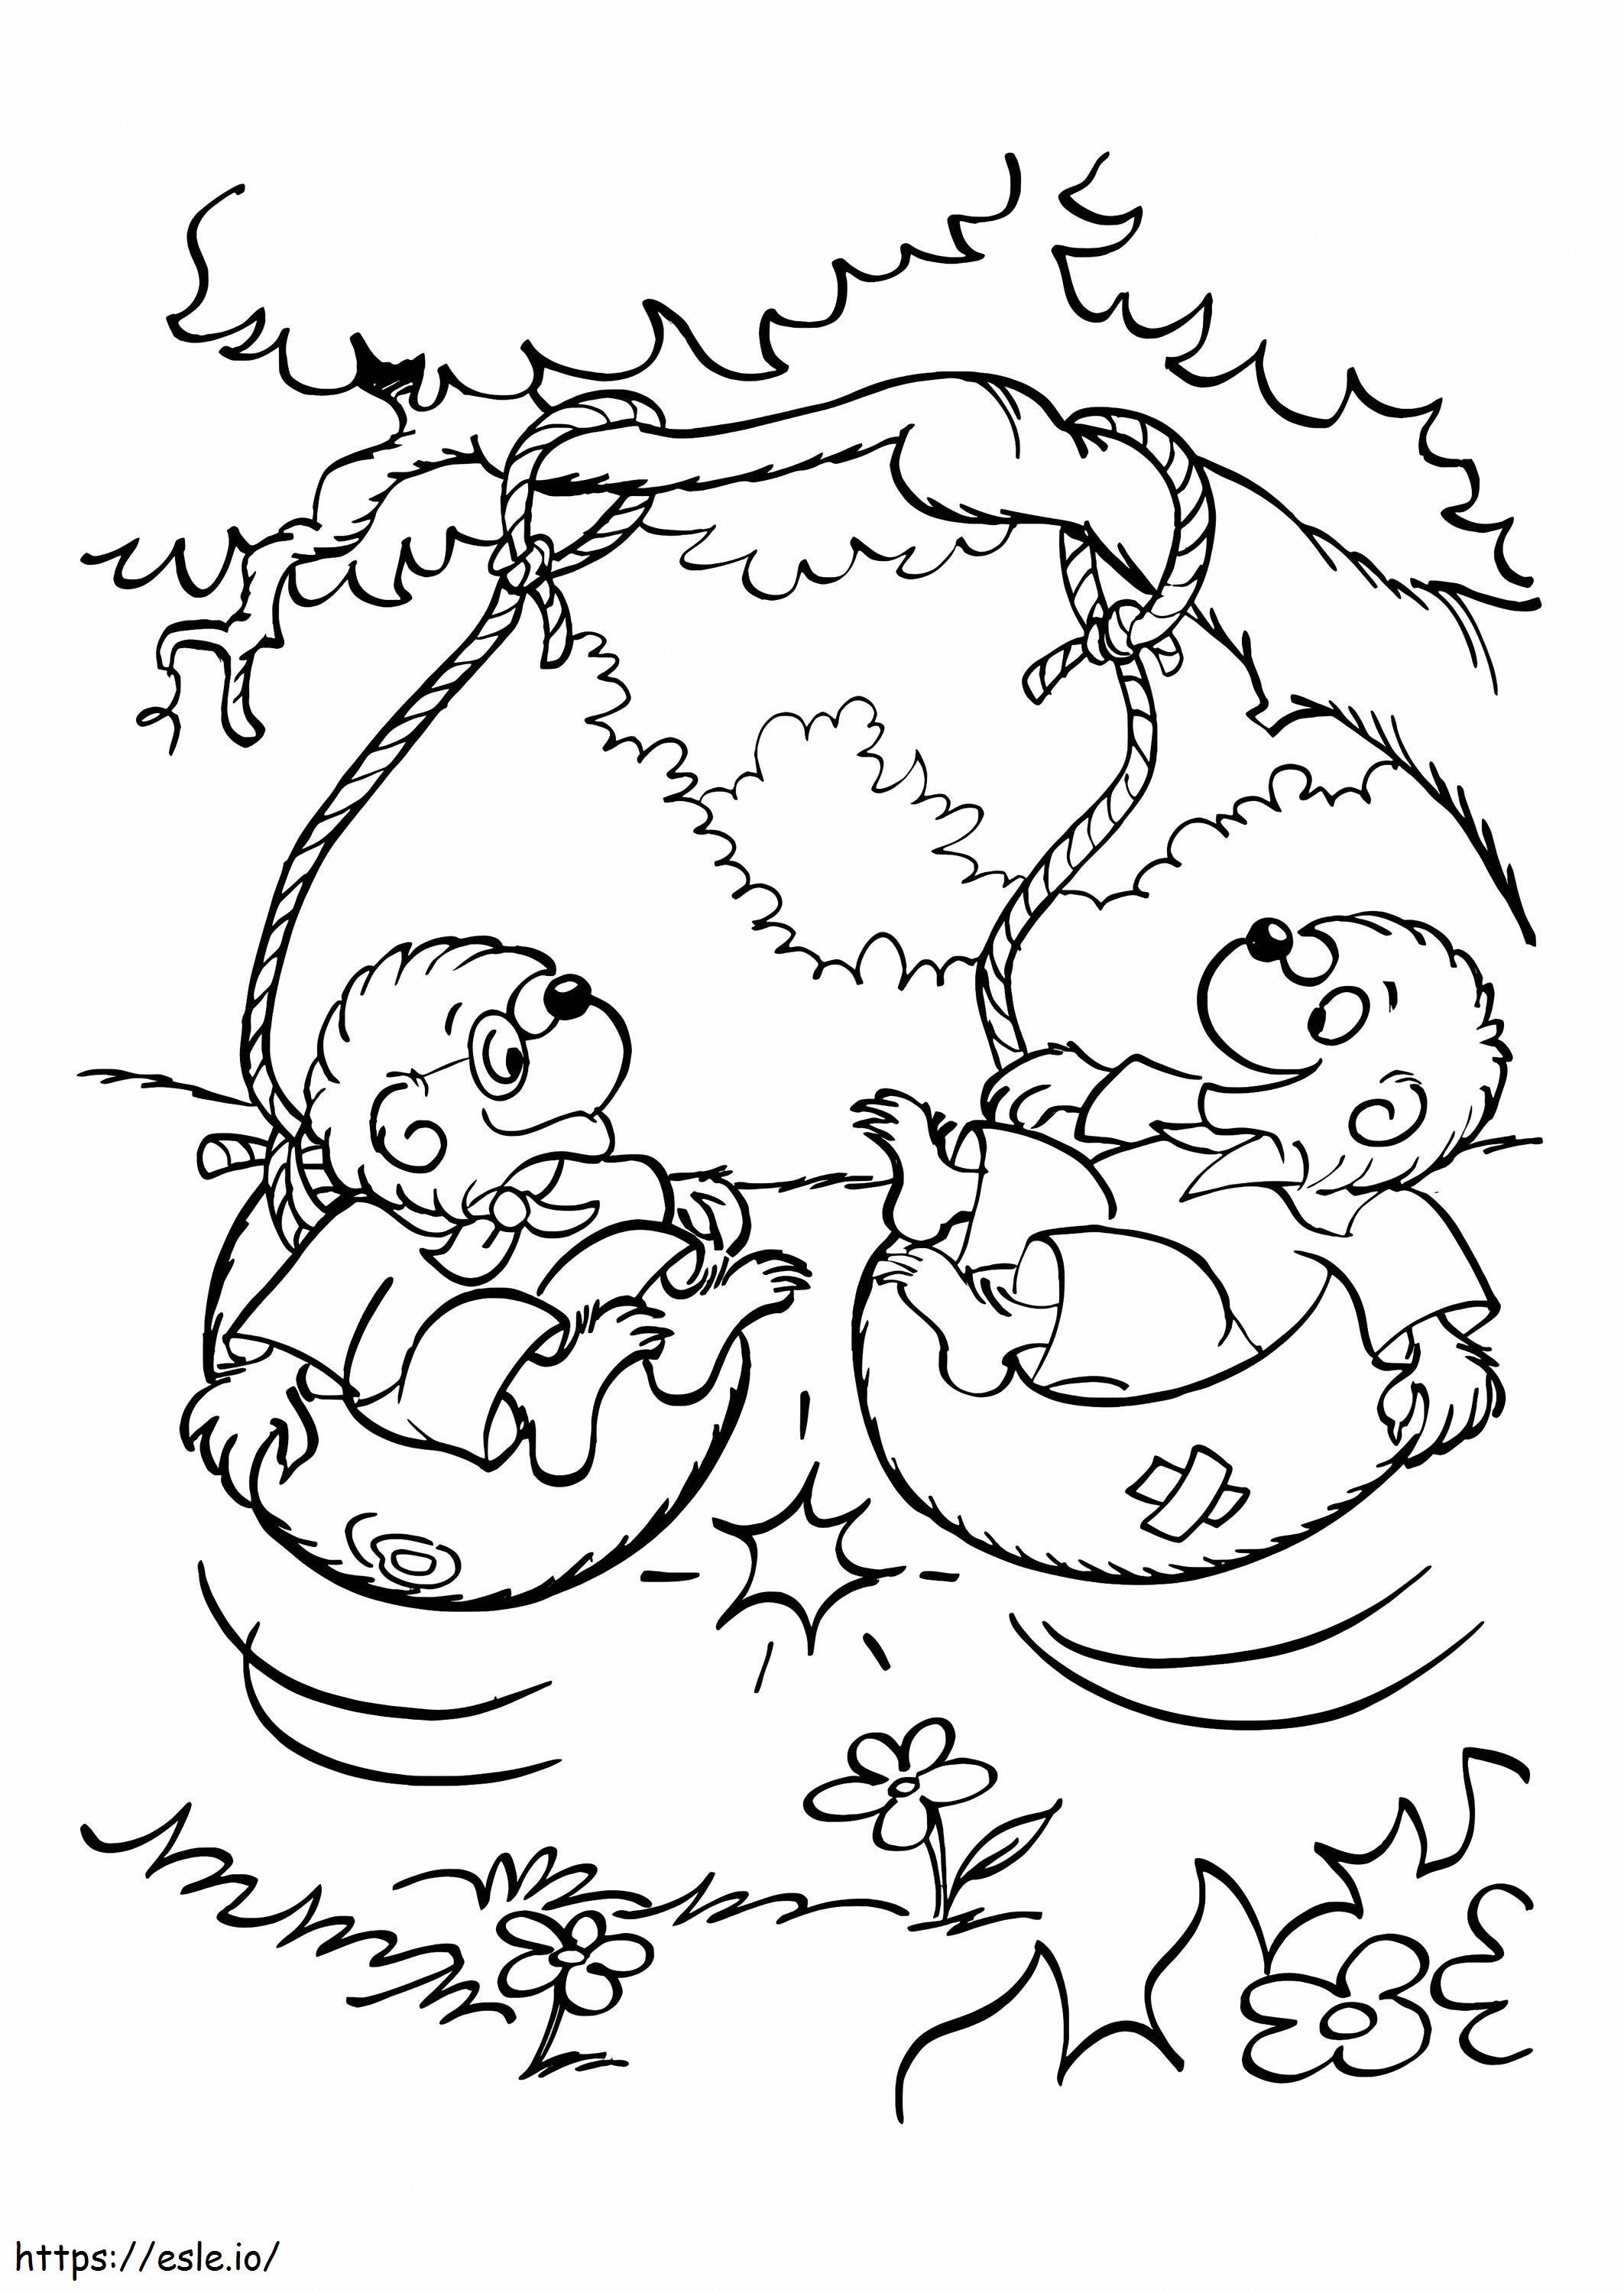 Two Bears Son Of Berenstain coloring page